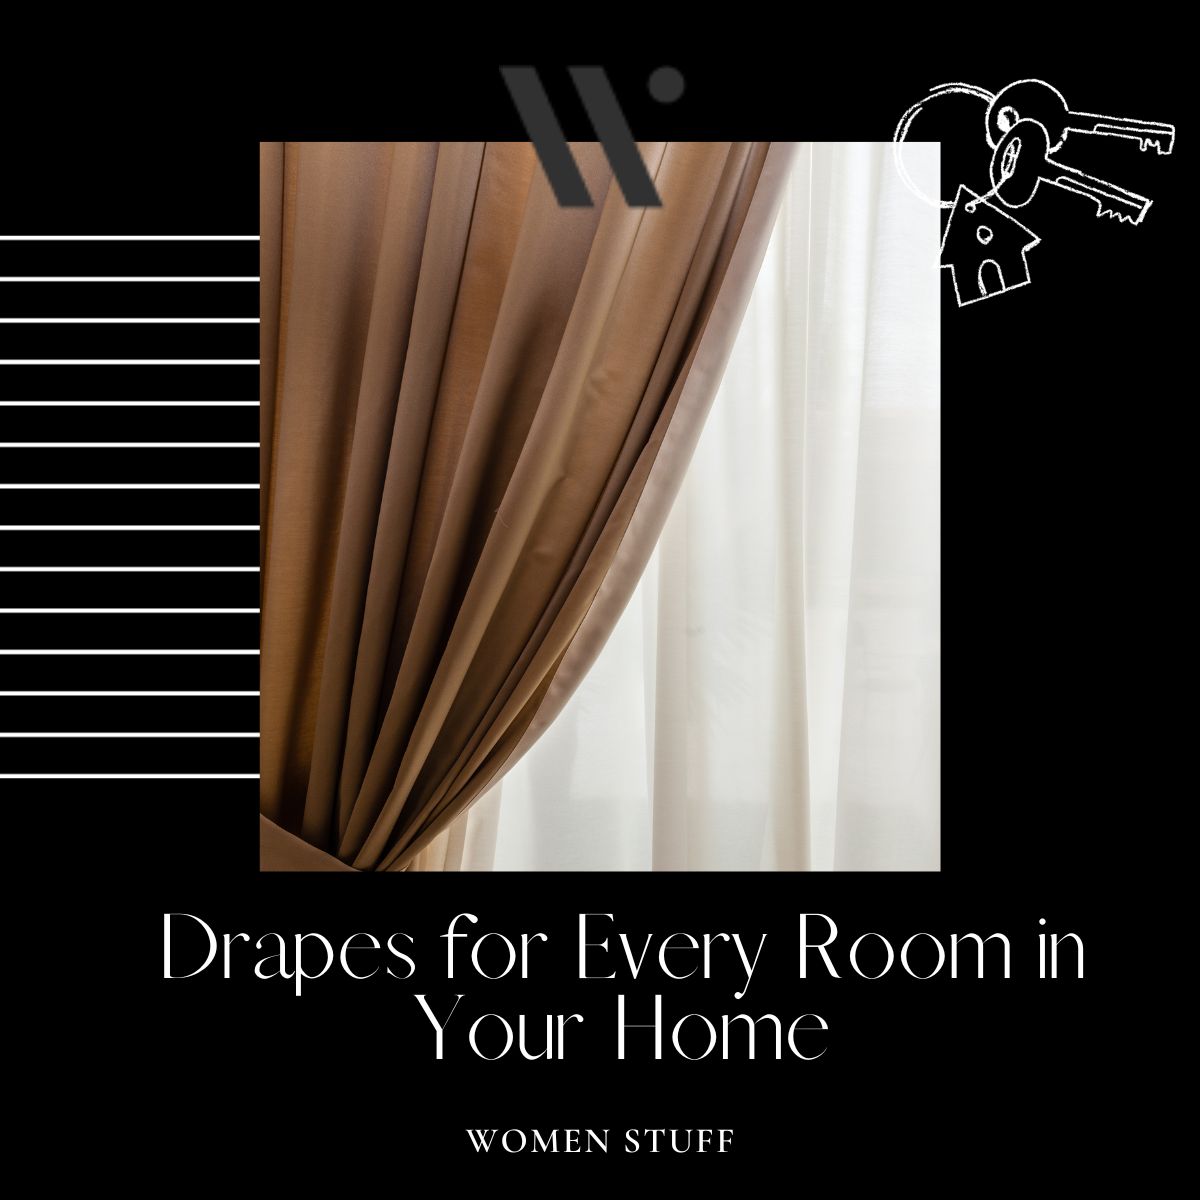 Drapes for Every Room in Your Home